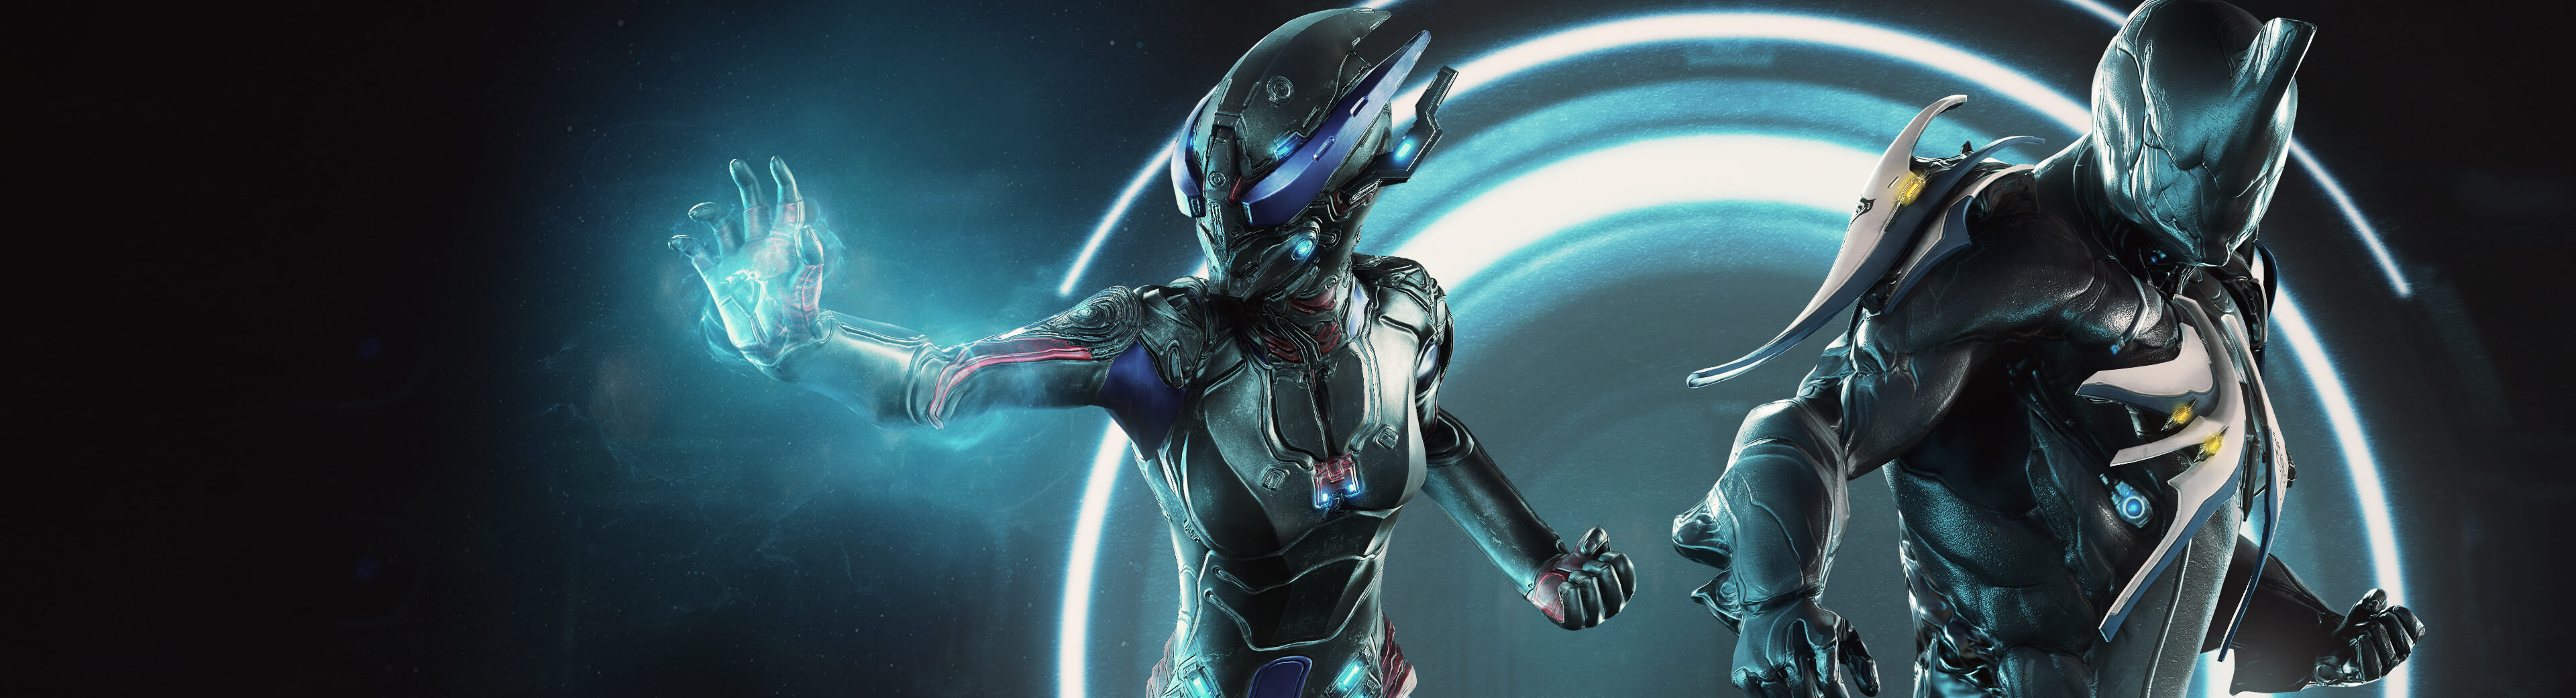 PREPARE FOR TENNOCON WITH NEW DIGITAL AND MERCH PACKS